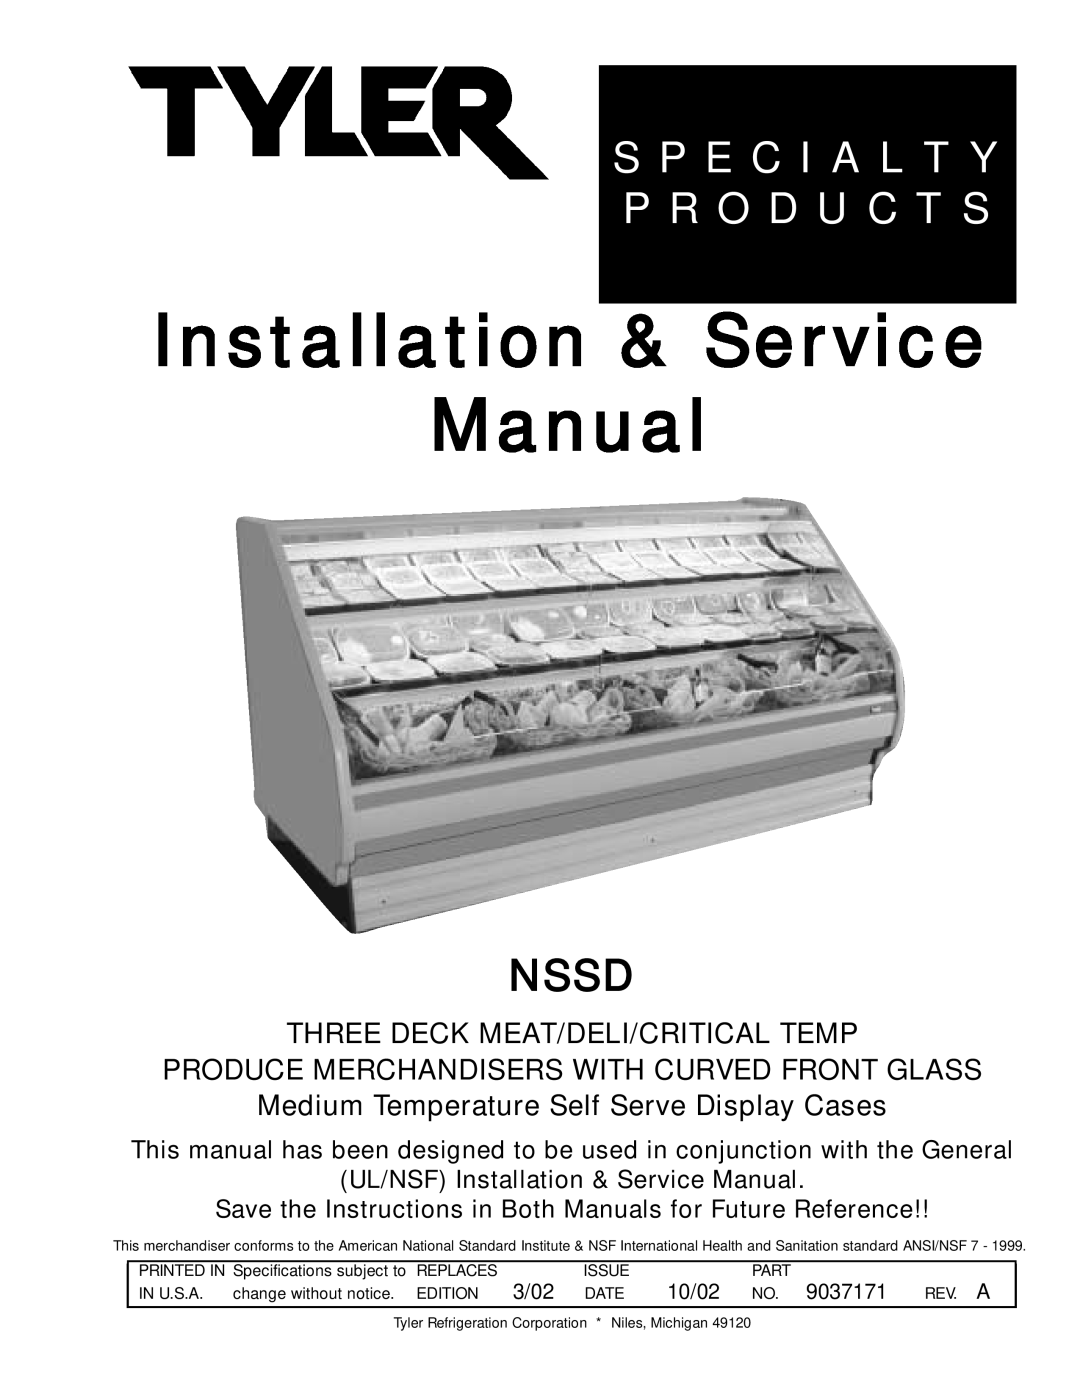 Tyler Refrigeration NSSD service manual Three Deck Meat/Deli/Critical Temp, Produce Merchandisers With Curved Front Glass 